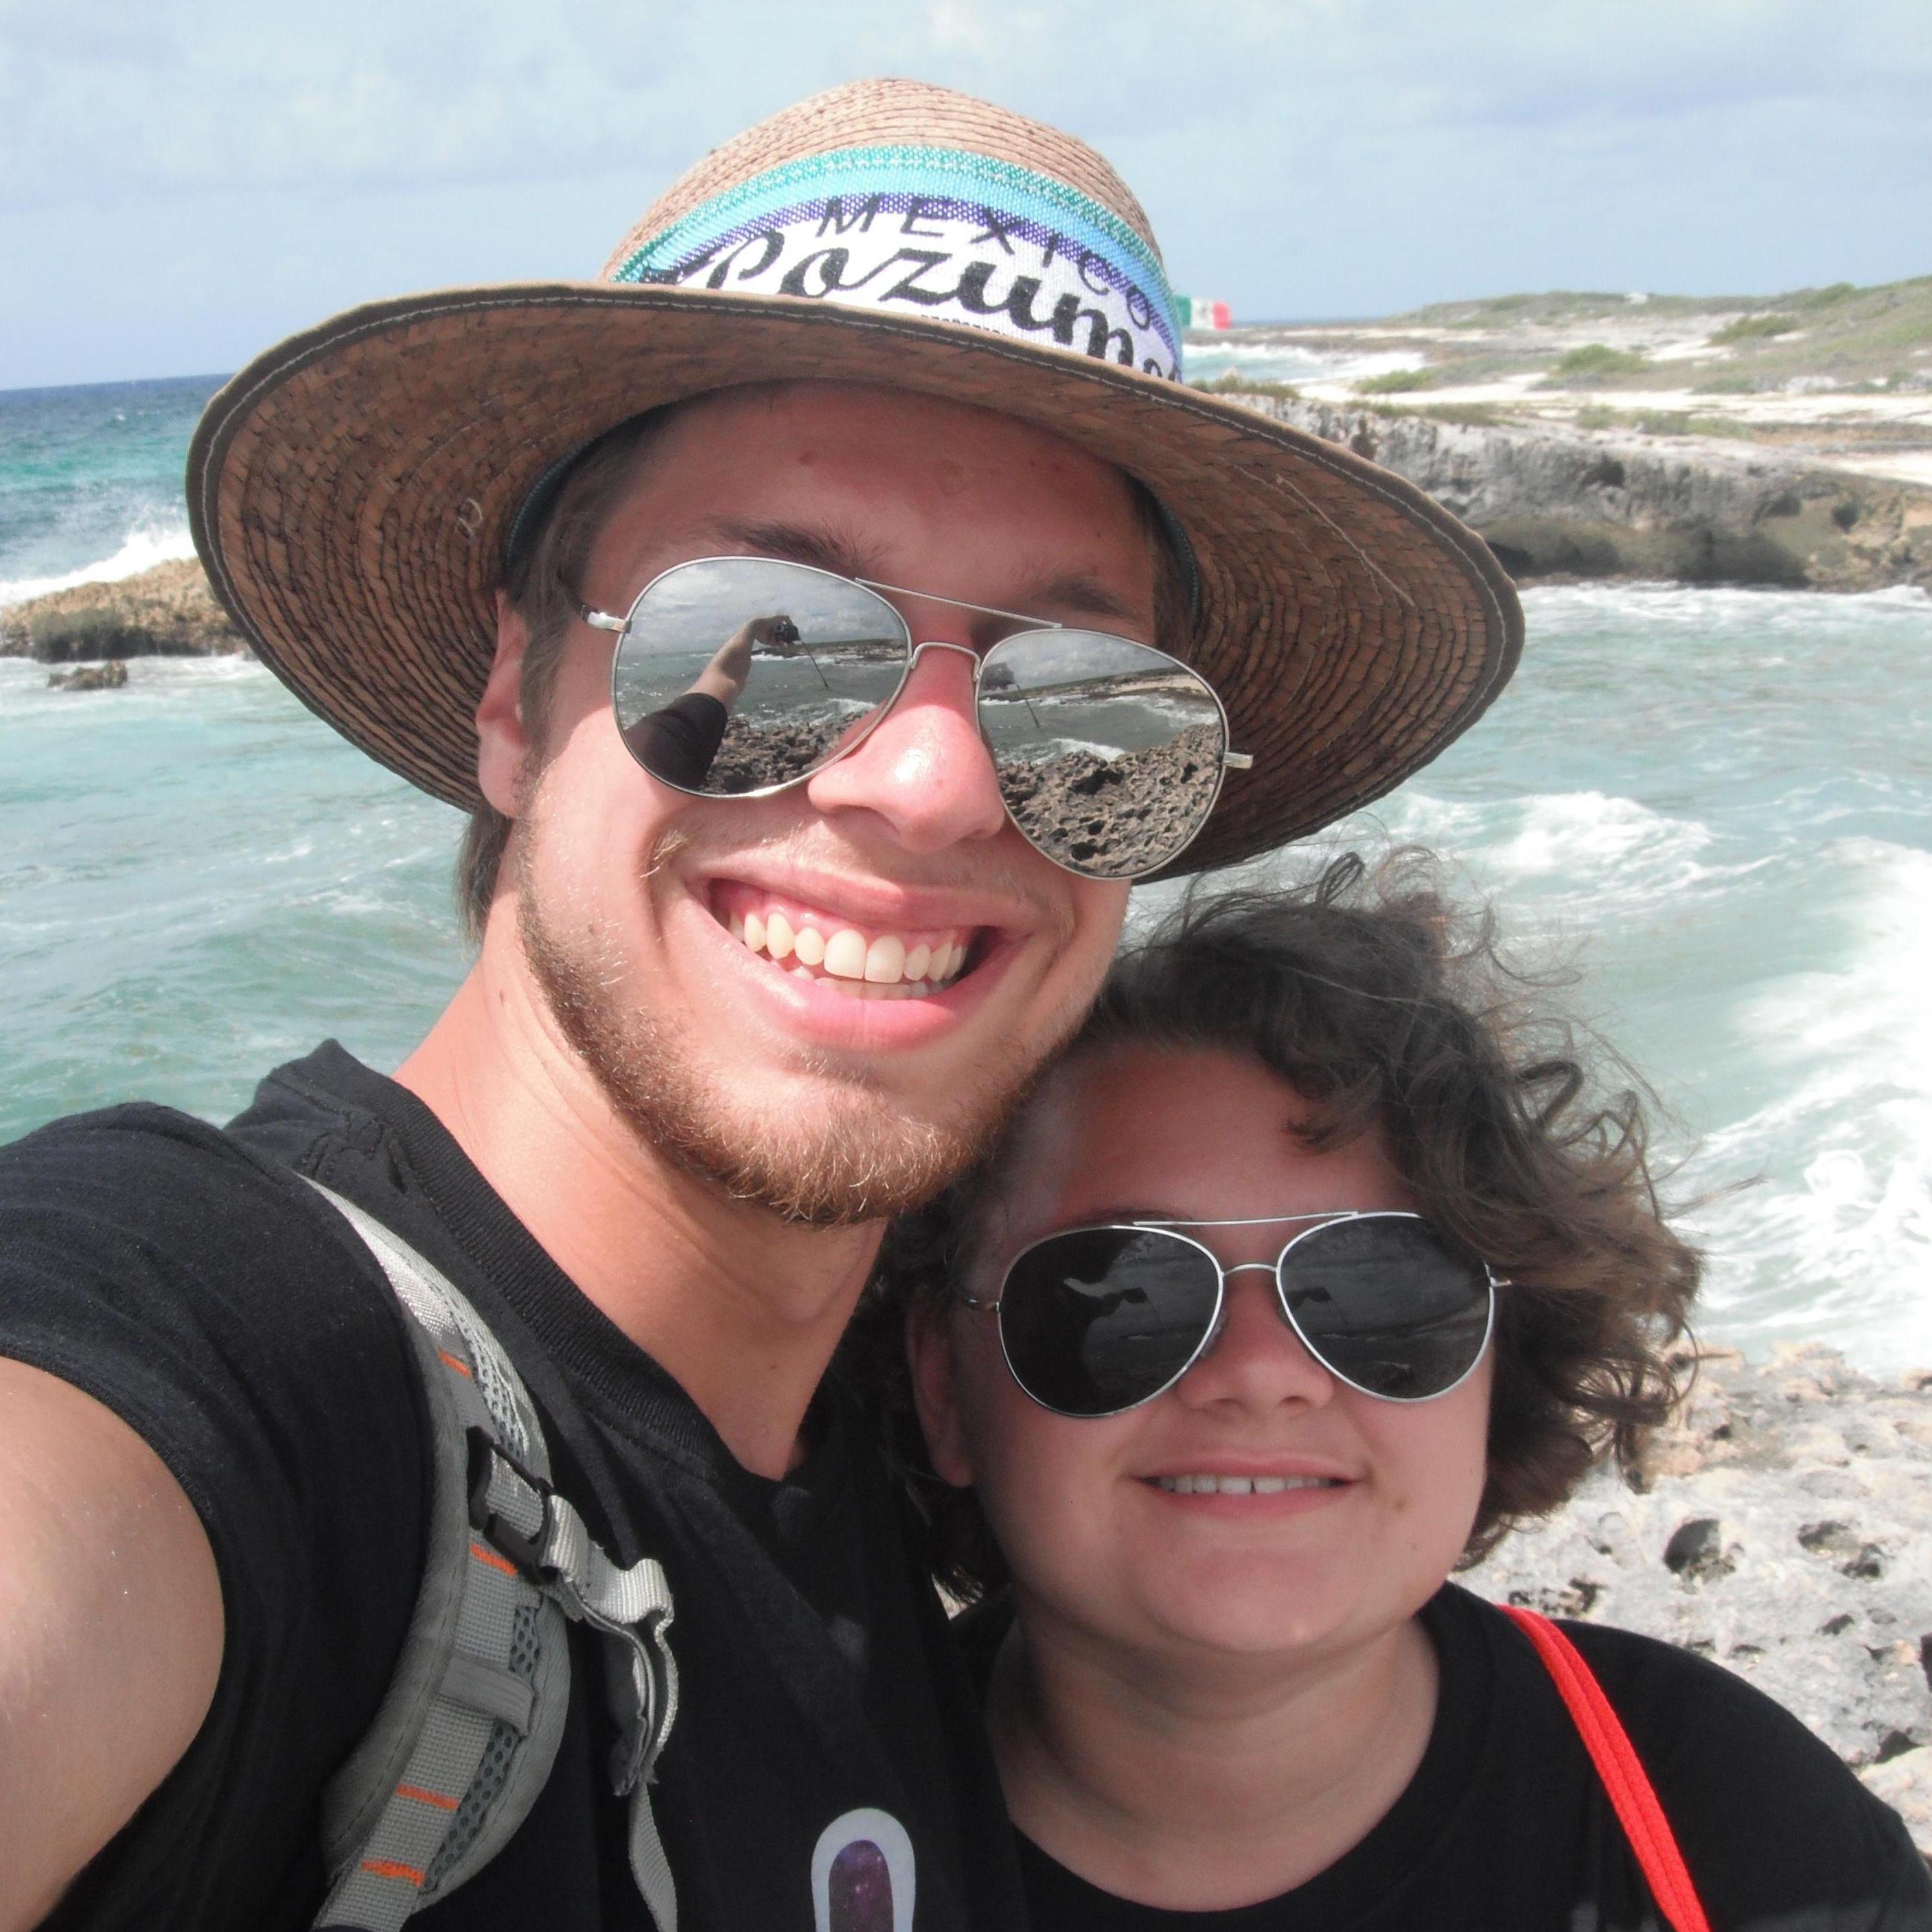 This is from Cozumel, Mexico from my senior trip.